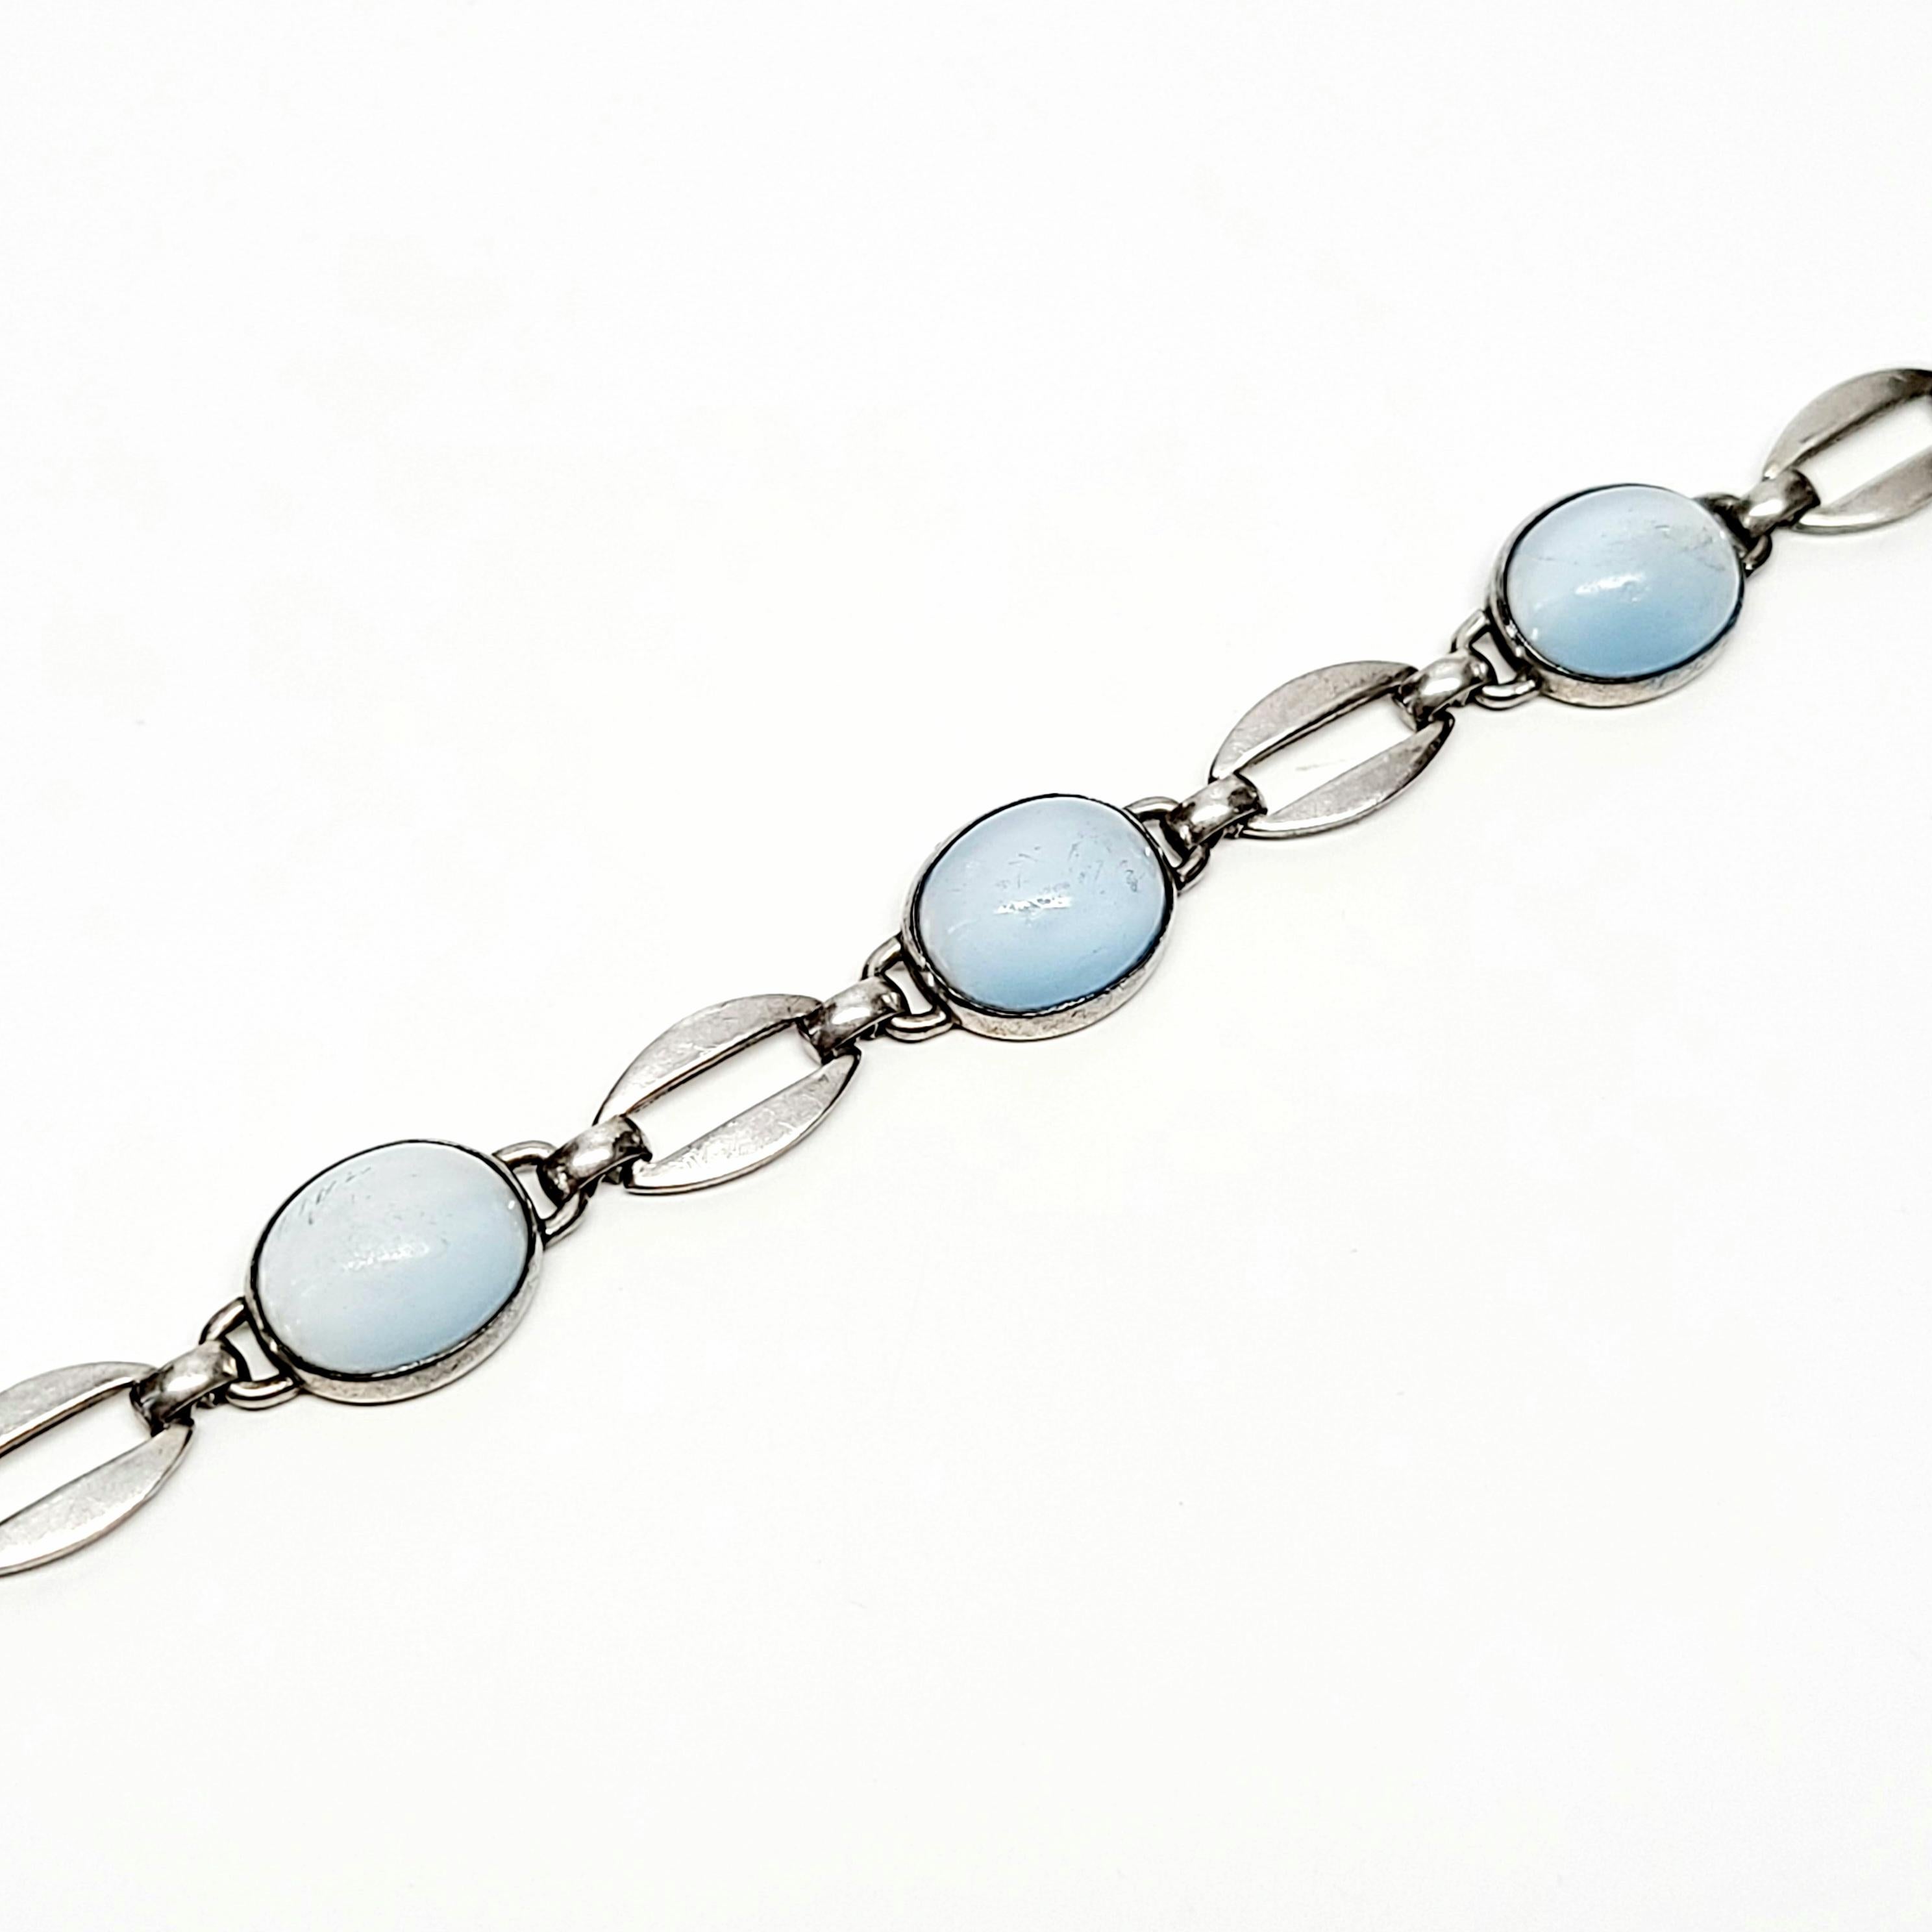 Sterling silver and moonstone link bracelet.

Beautiful oval moonstone cabochons alternating with thin silver oval open links.

Measures approx 7 1/2